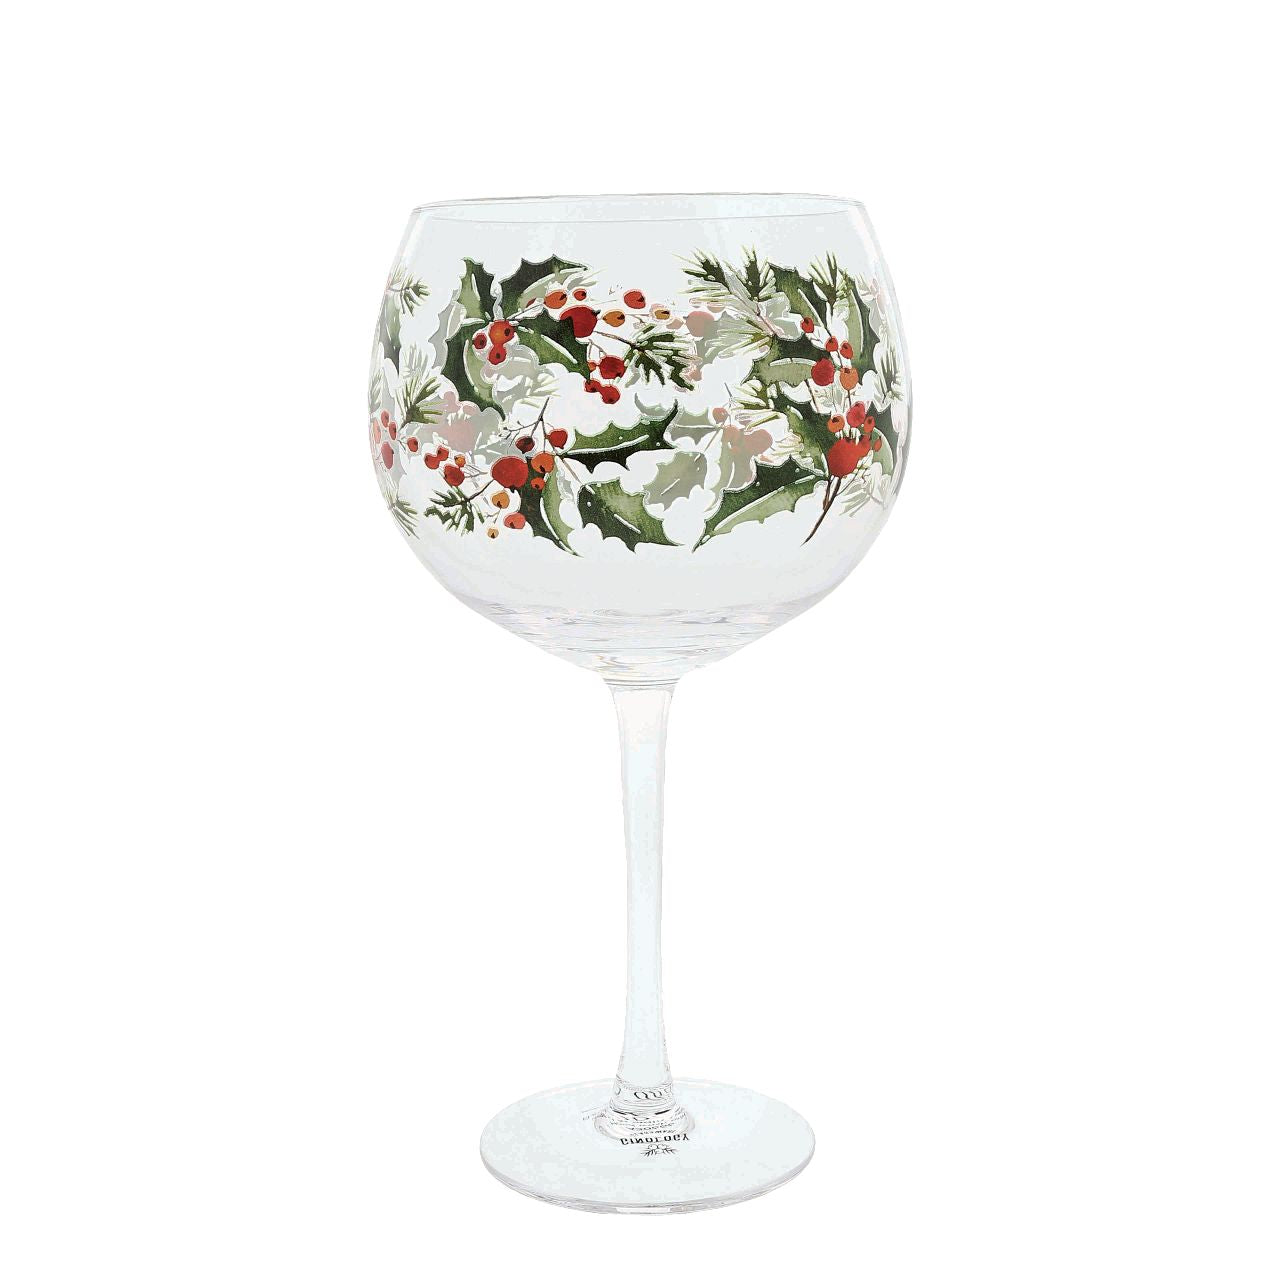 Ginology Christmas Holly Copa Gin Glass  Deck your Christmas Gin glass this holiday with our Holly Copa Gin glass. Looking for the ultimate gift or a self purchase? Why not team this up with your favourite drink for a luxury gift for your friend, grandmother, sister, or mother. Bright red berries and two toned Christmas holly surrounds the glass to keep the Christmas spirit up all year round.